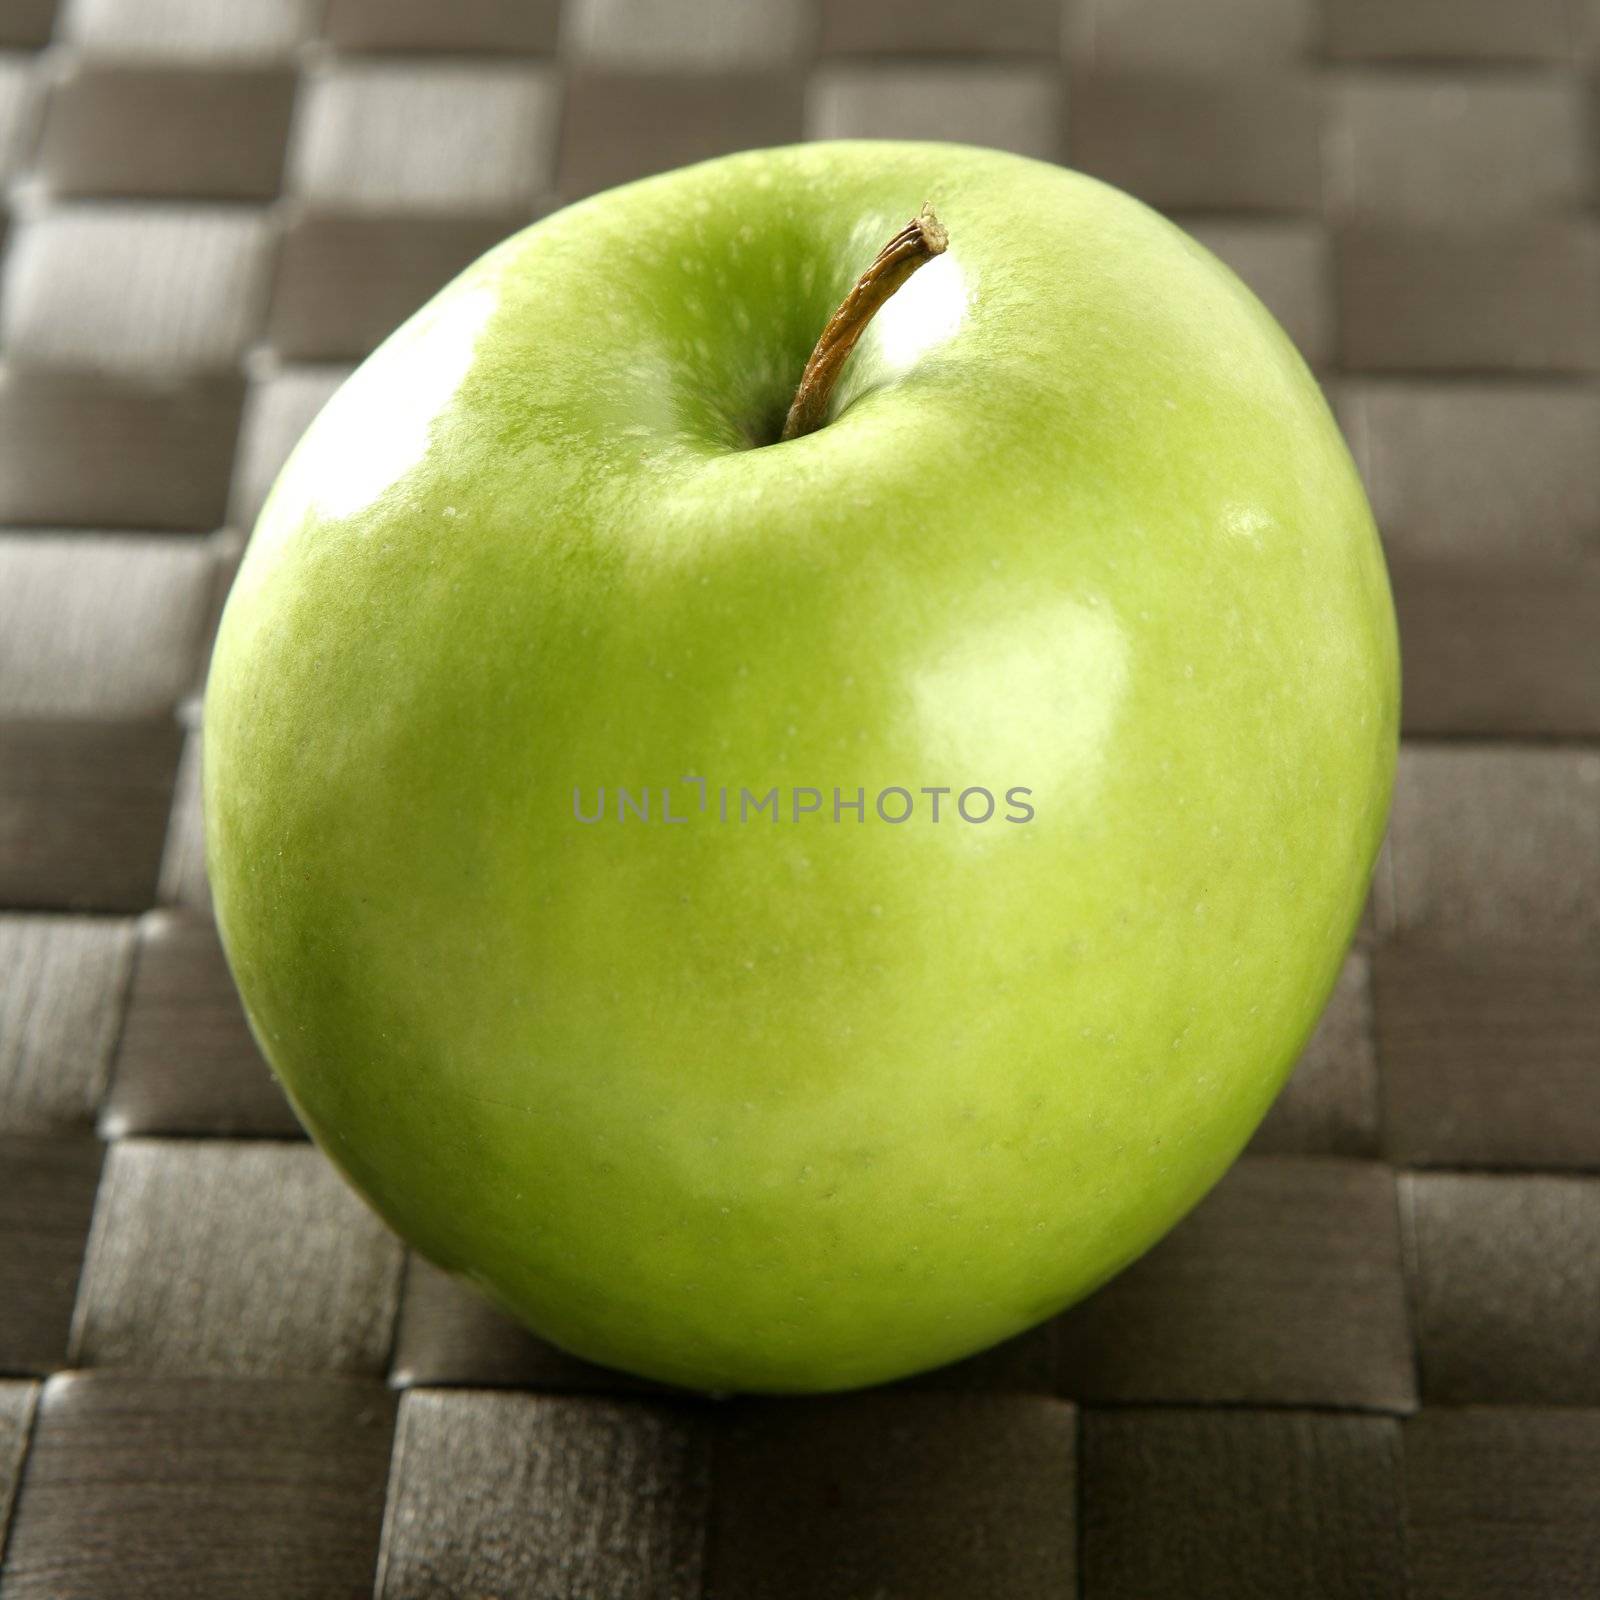 Sweet fruit, apples on a brown tablecloth